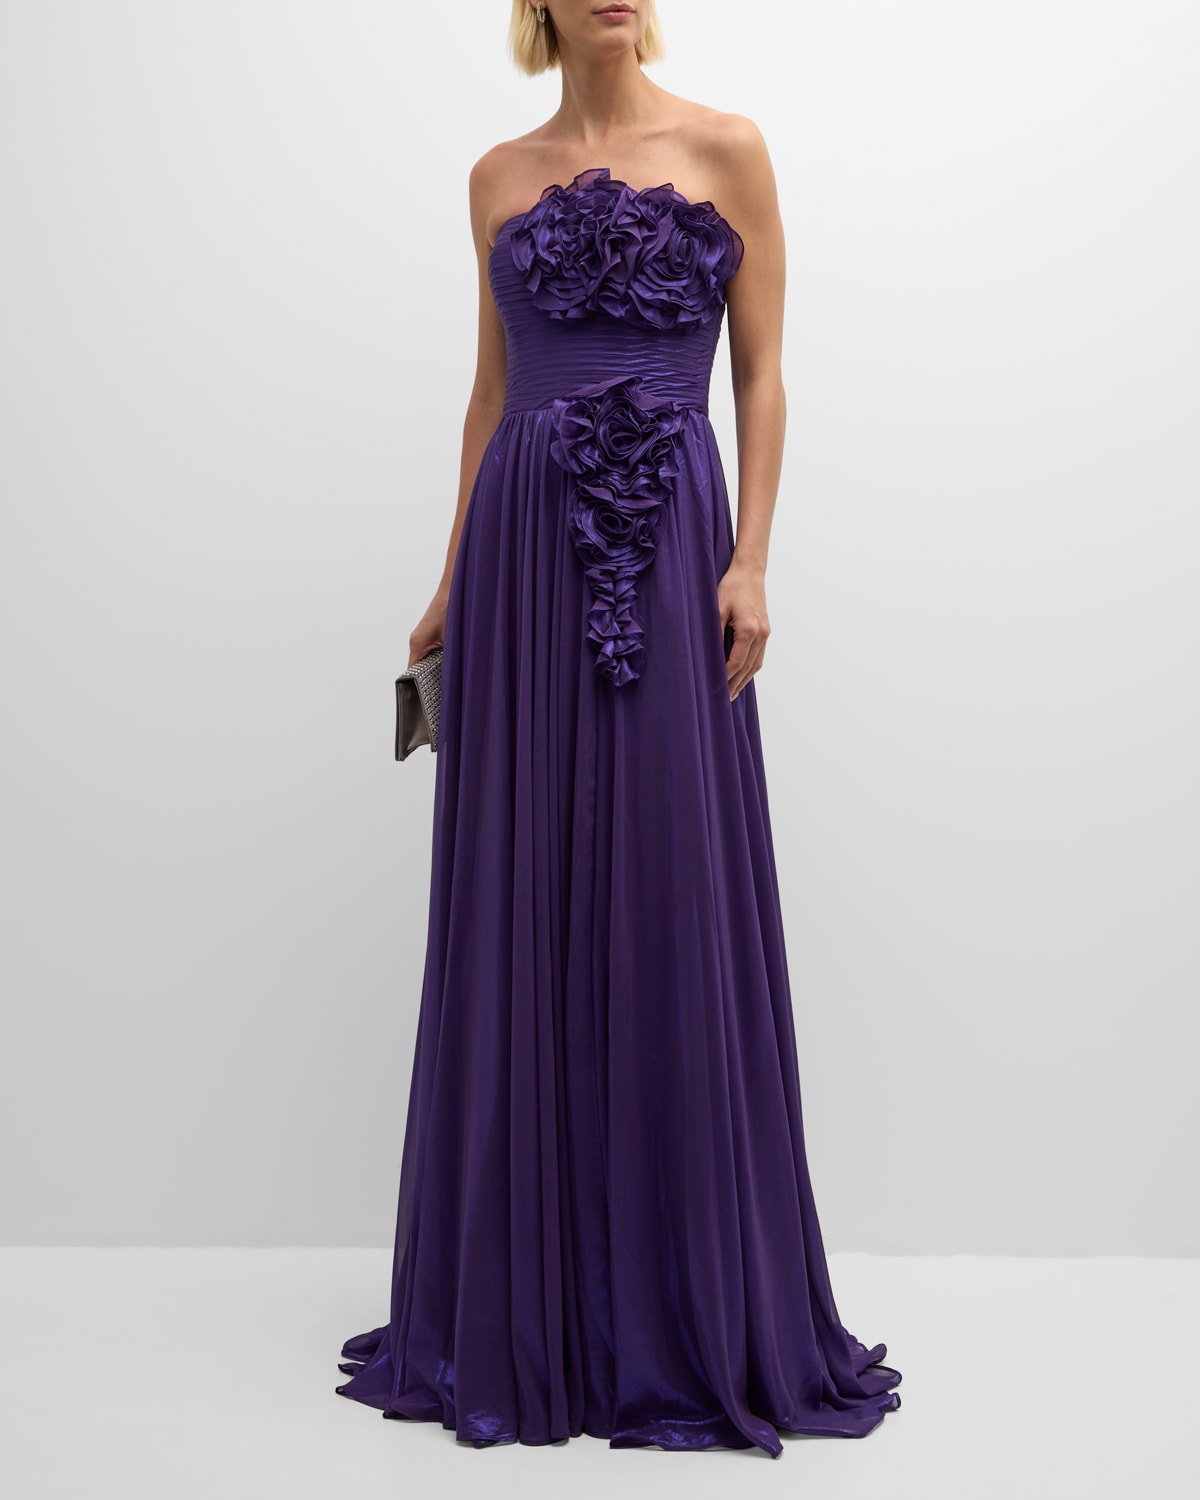 Strapless Flower-Embellished Gown